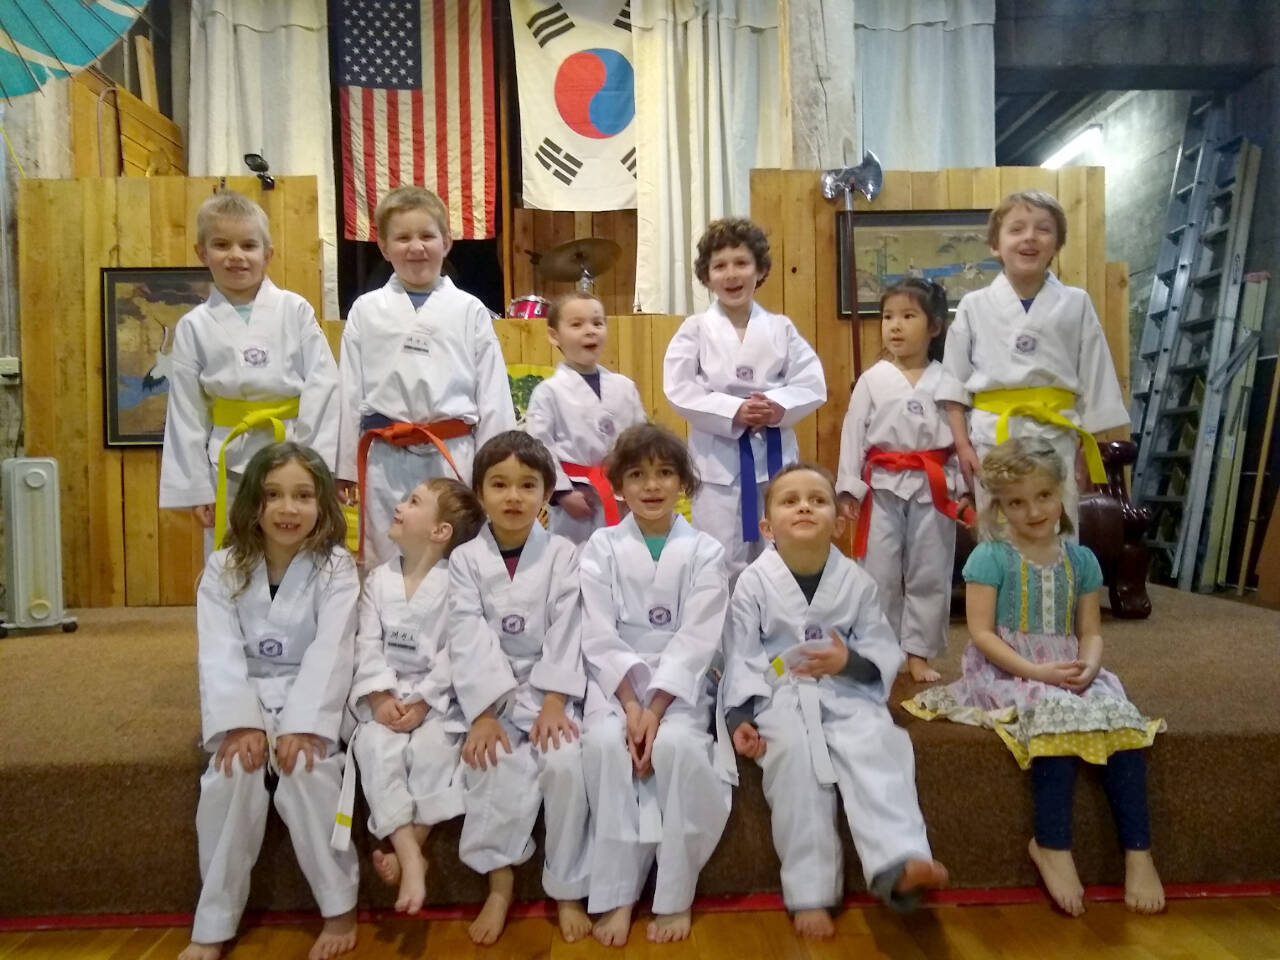 White Crane Martial Arts in Port Angeles is adding more classes during the winter in an effort to expand its programs. (Courtesy photo)